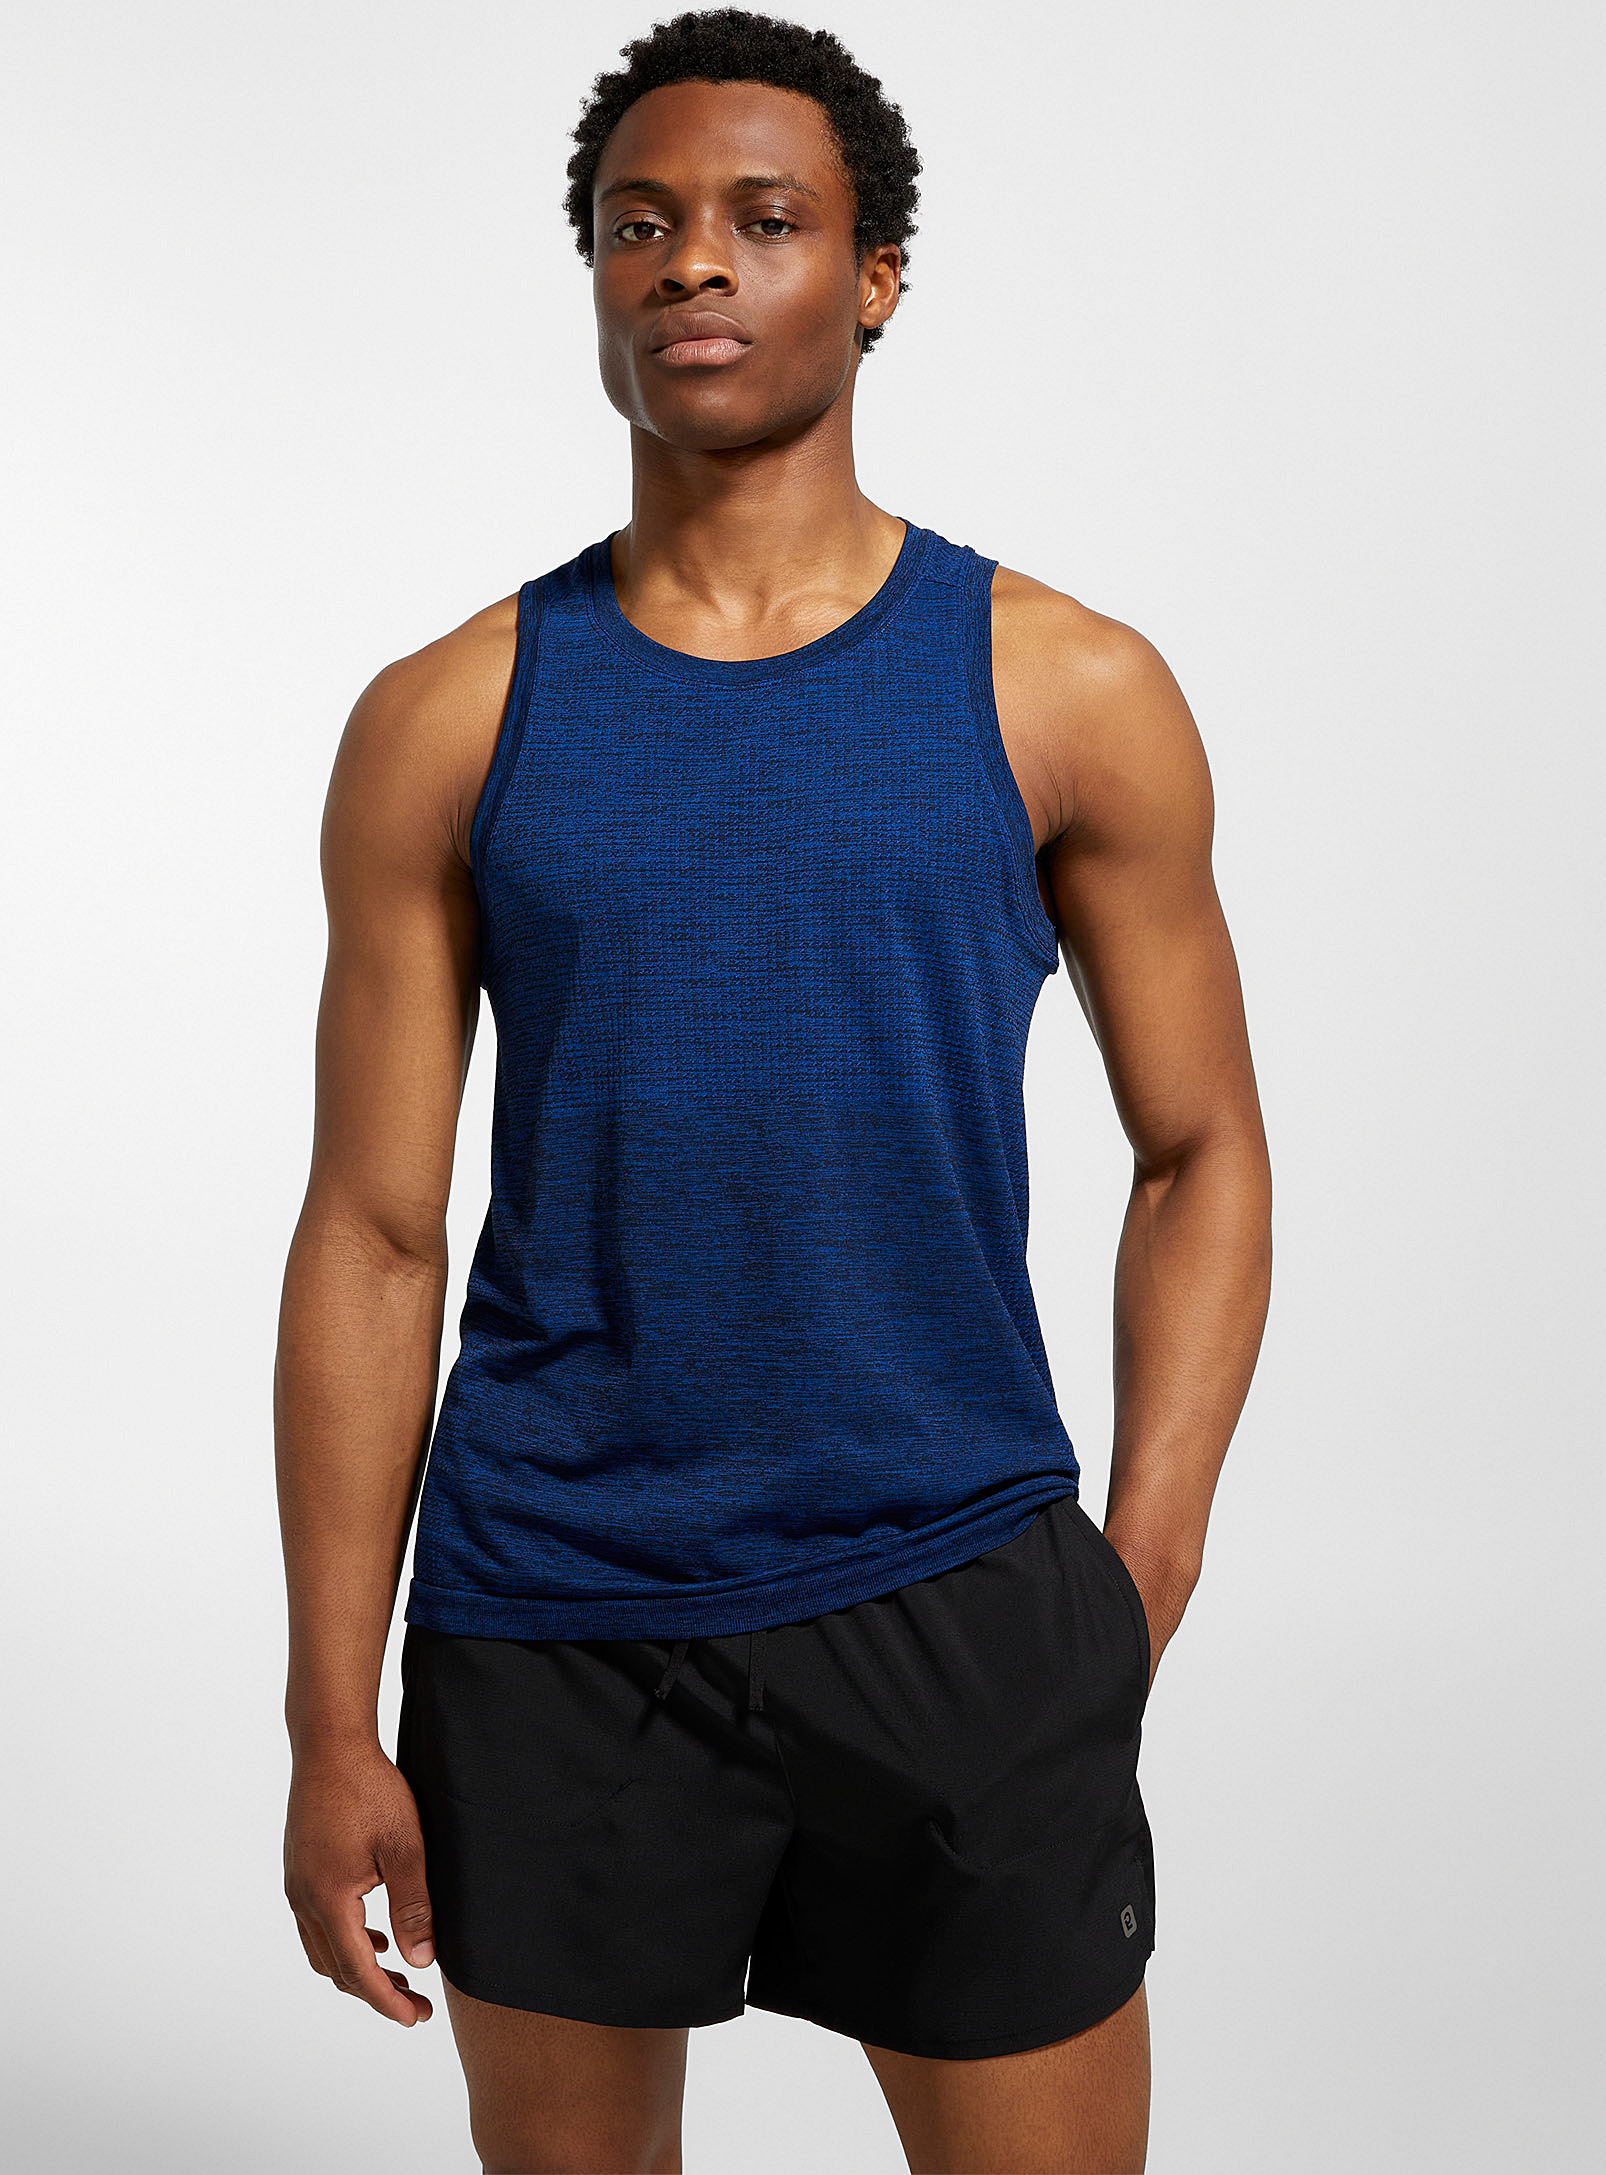 I.fiv5 Perforated Tank In Royal/sapphire Blue